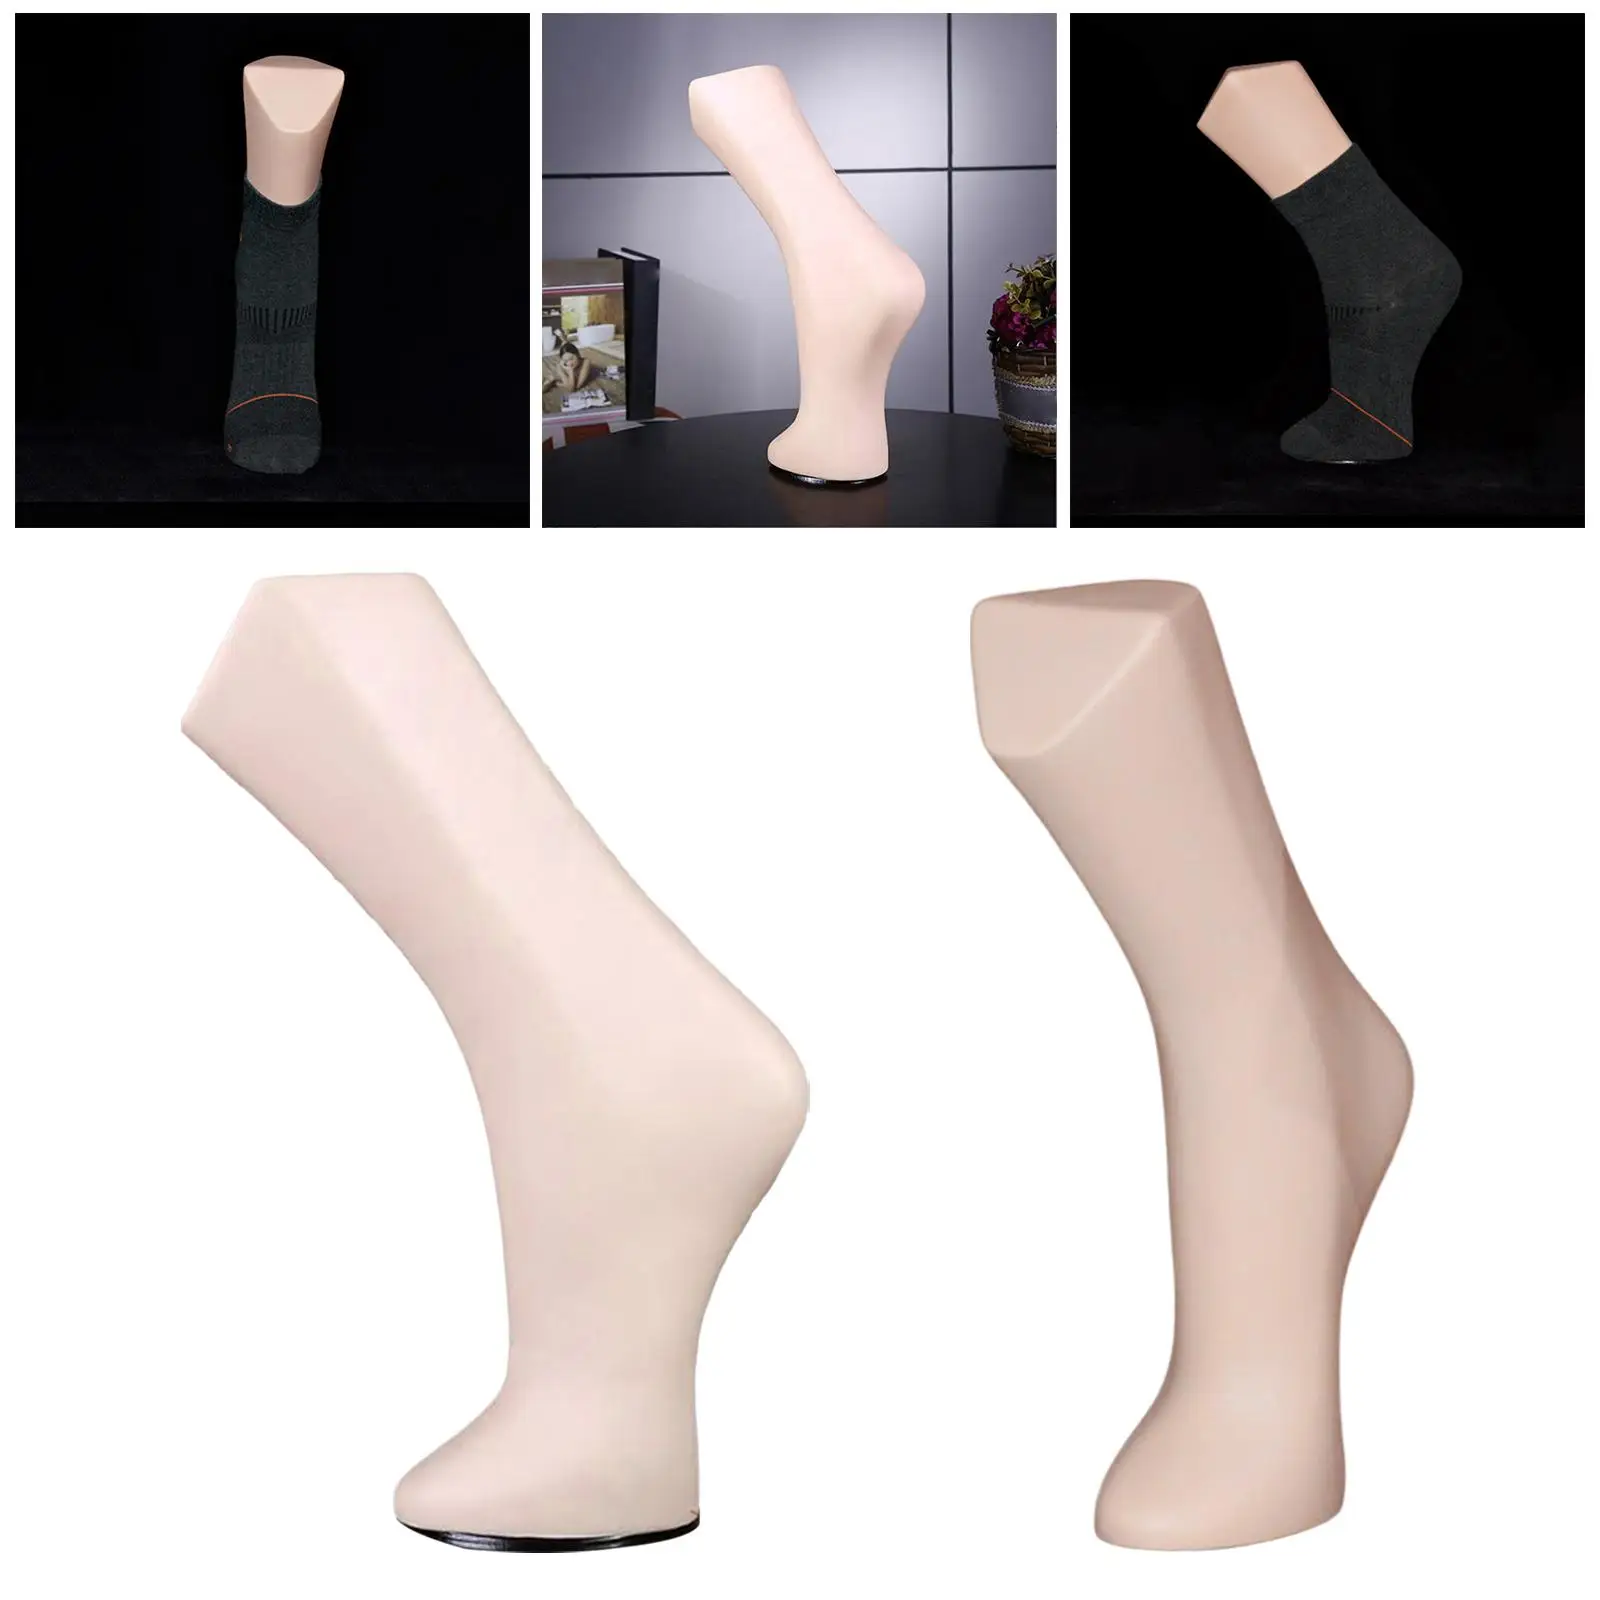 Plastic Foot Sock Model Stocking Display Display Stand Display Mannequin Shoes Support for Store Shop Home